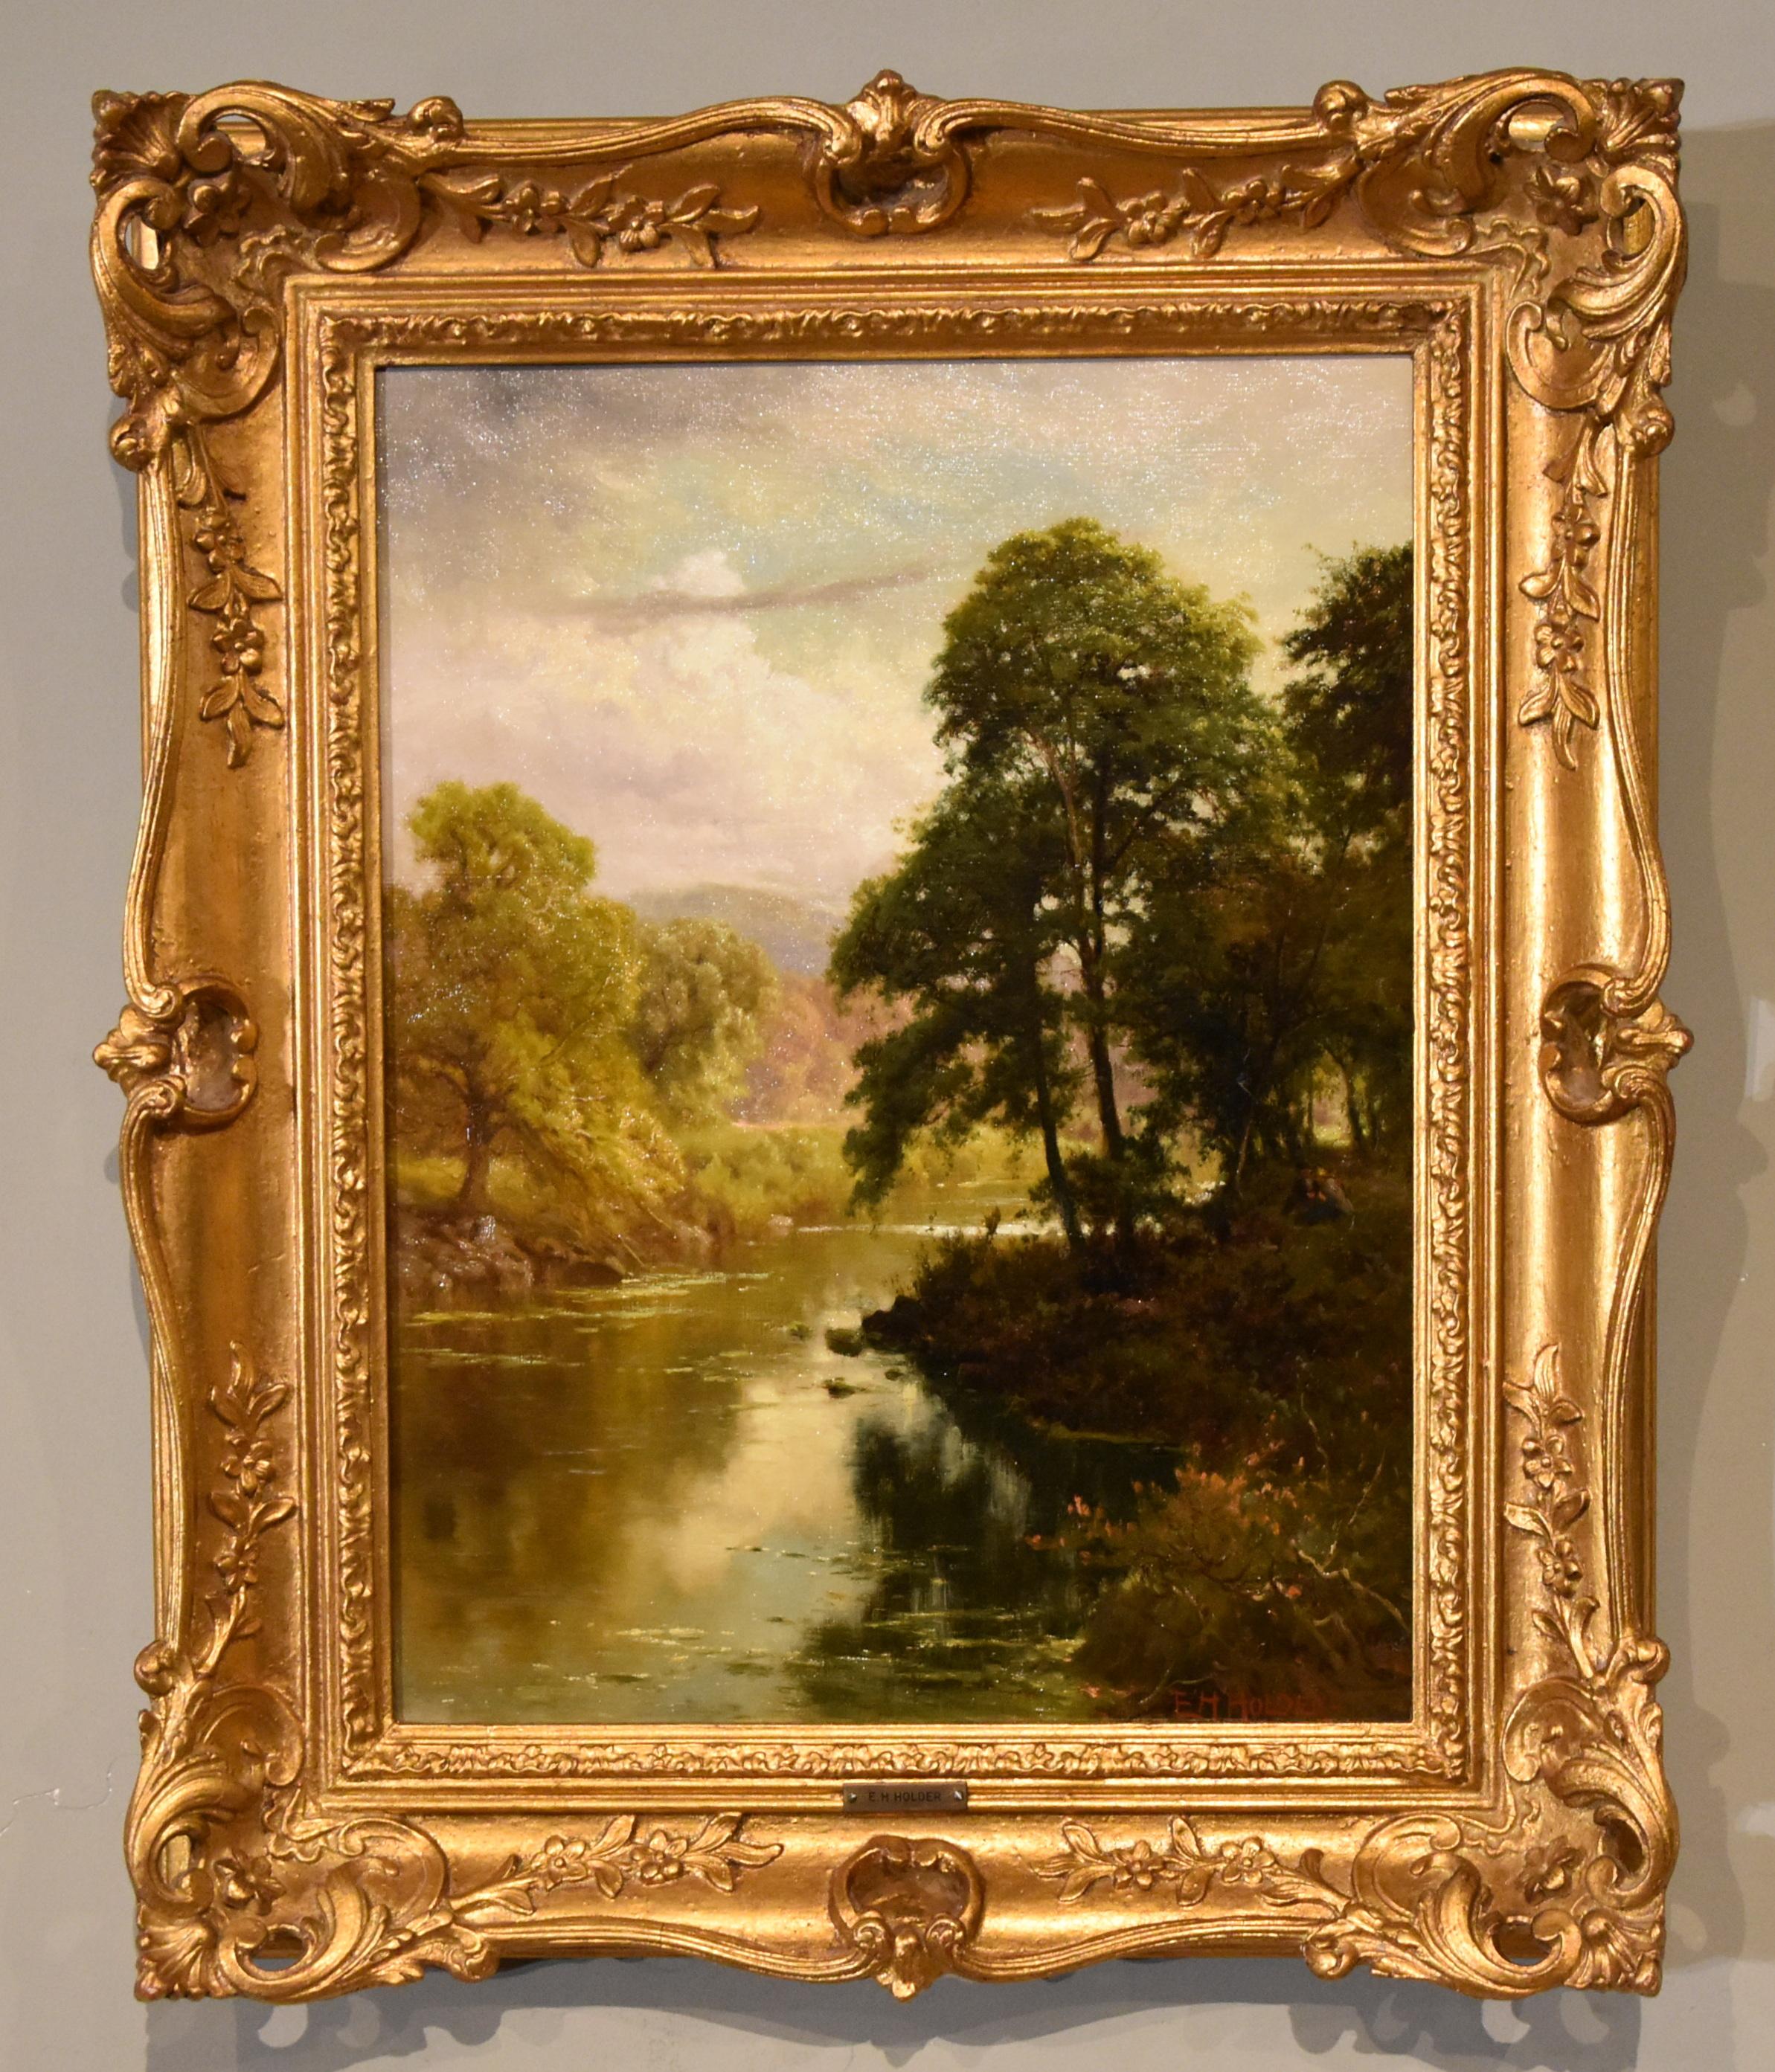 Oil Painting by Edward Henry Holder  "The Picnic by the River" 1847 - 1922 Scarborough born Painter of atmospheric rural landscapes. Exhibited widely including at the Royal Academy. Represented in many important collections including V &A. Oil on